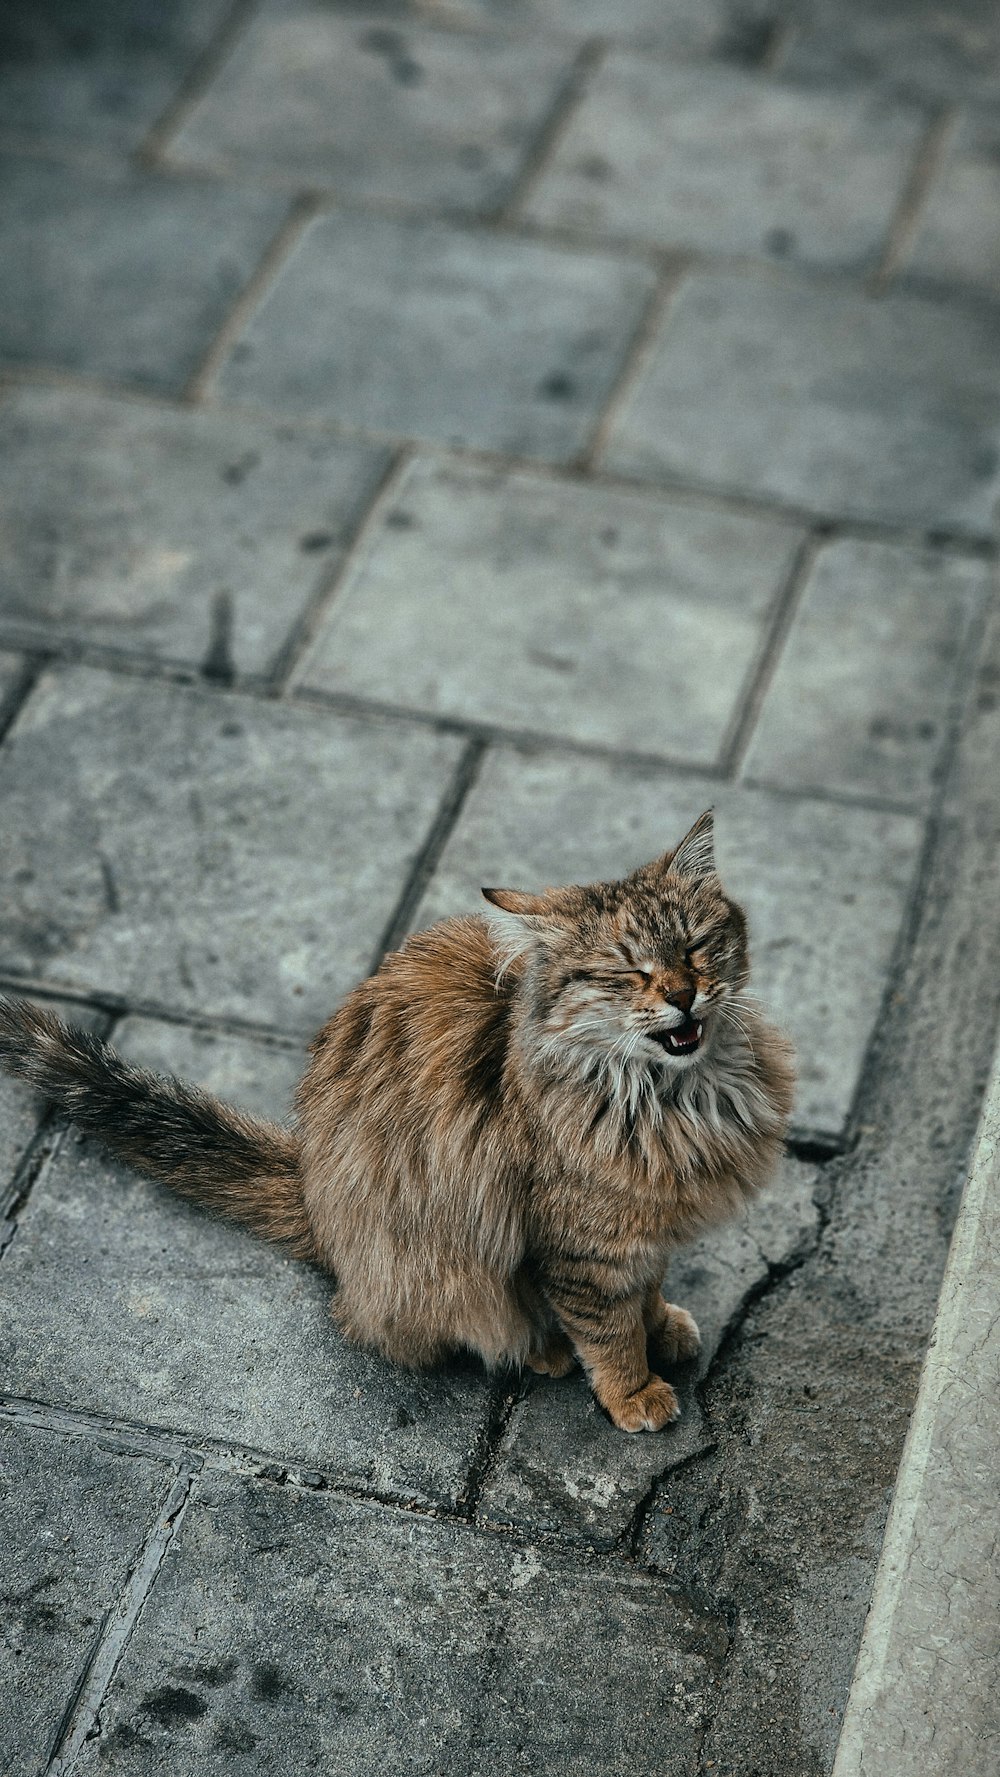 a cat is sitting on the ground and yawning